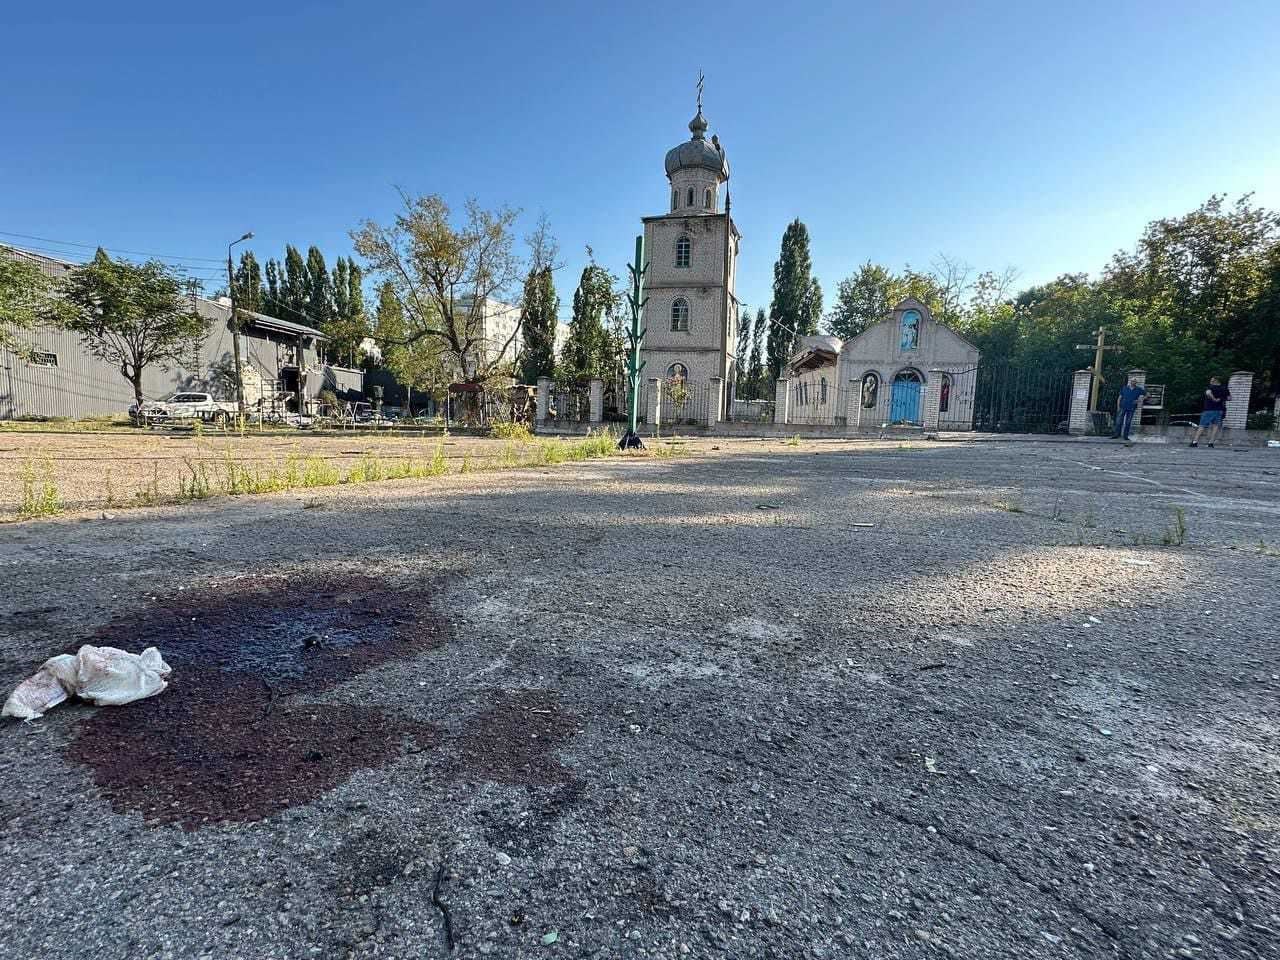 Blood stains the ground in front of buildings bombed out by Russian attacks.